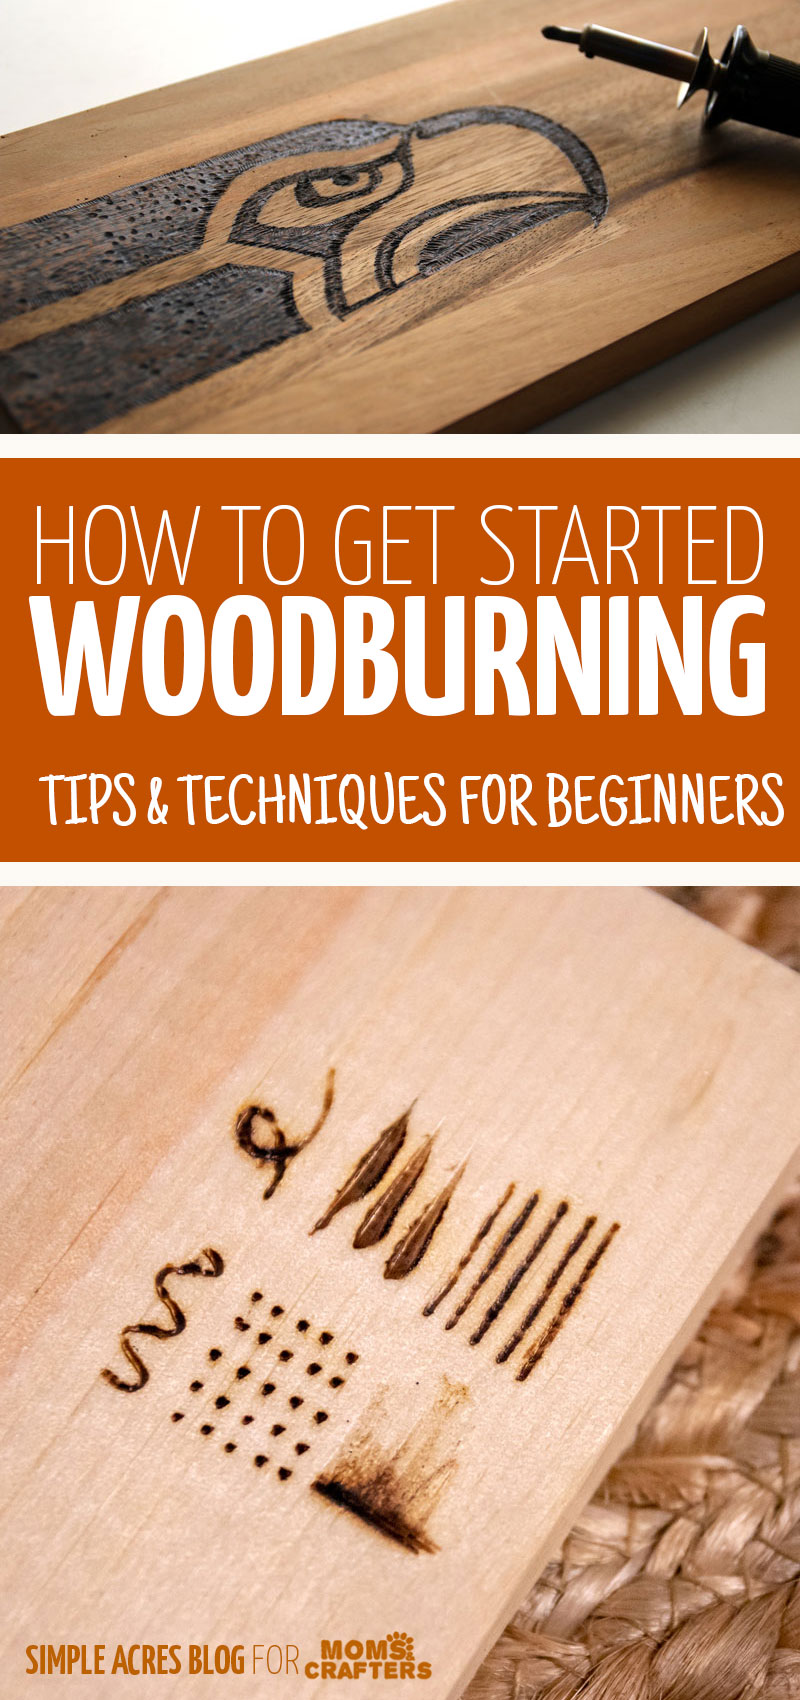 Wood Burning Tips and Textures